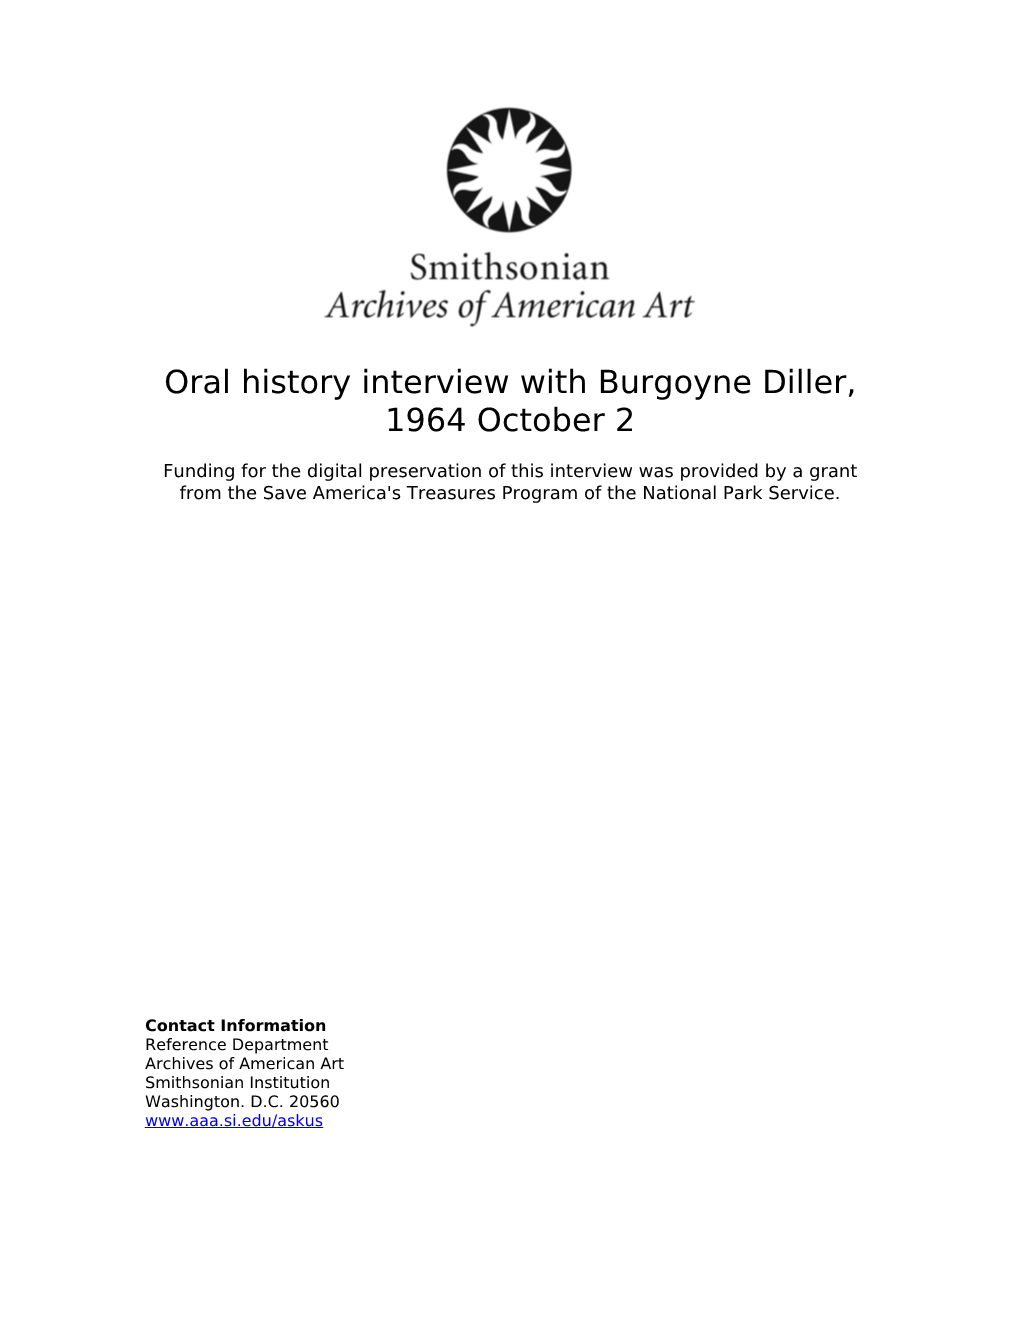 Oral History Interview with Burgoyne Diller, 1964 October 2